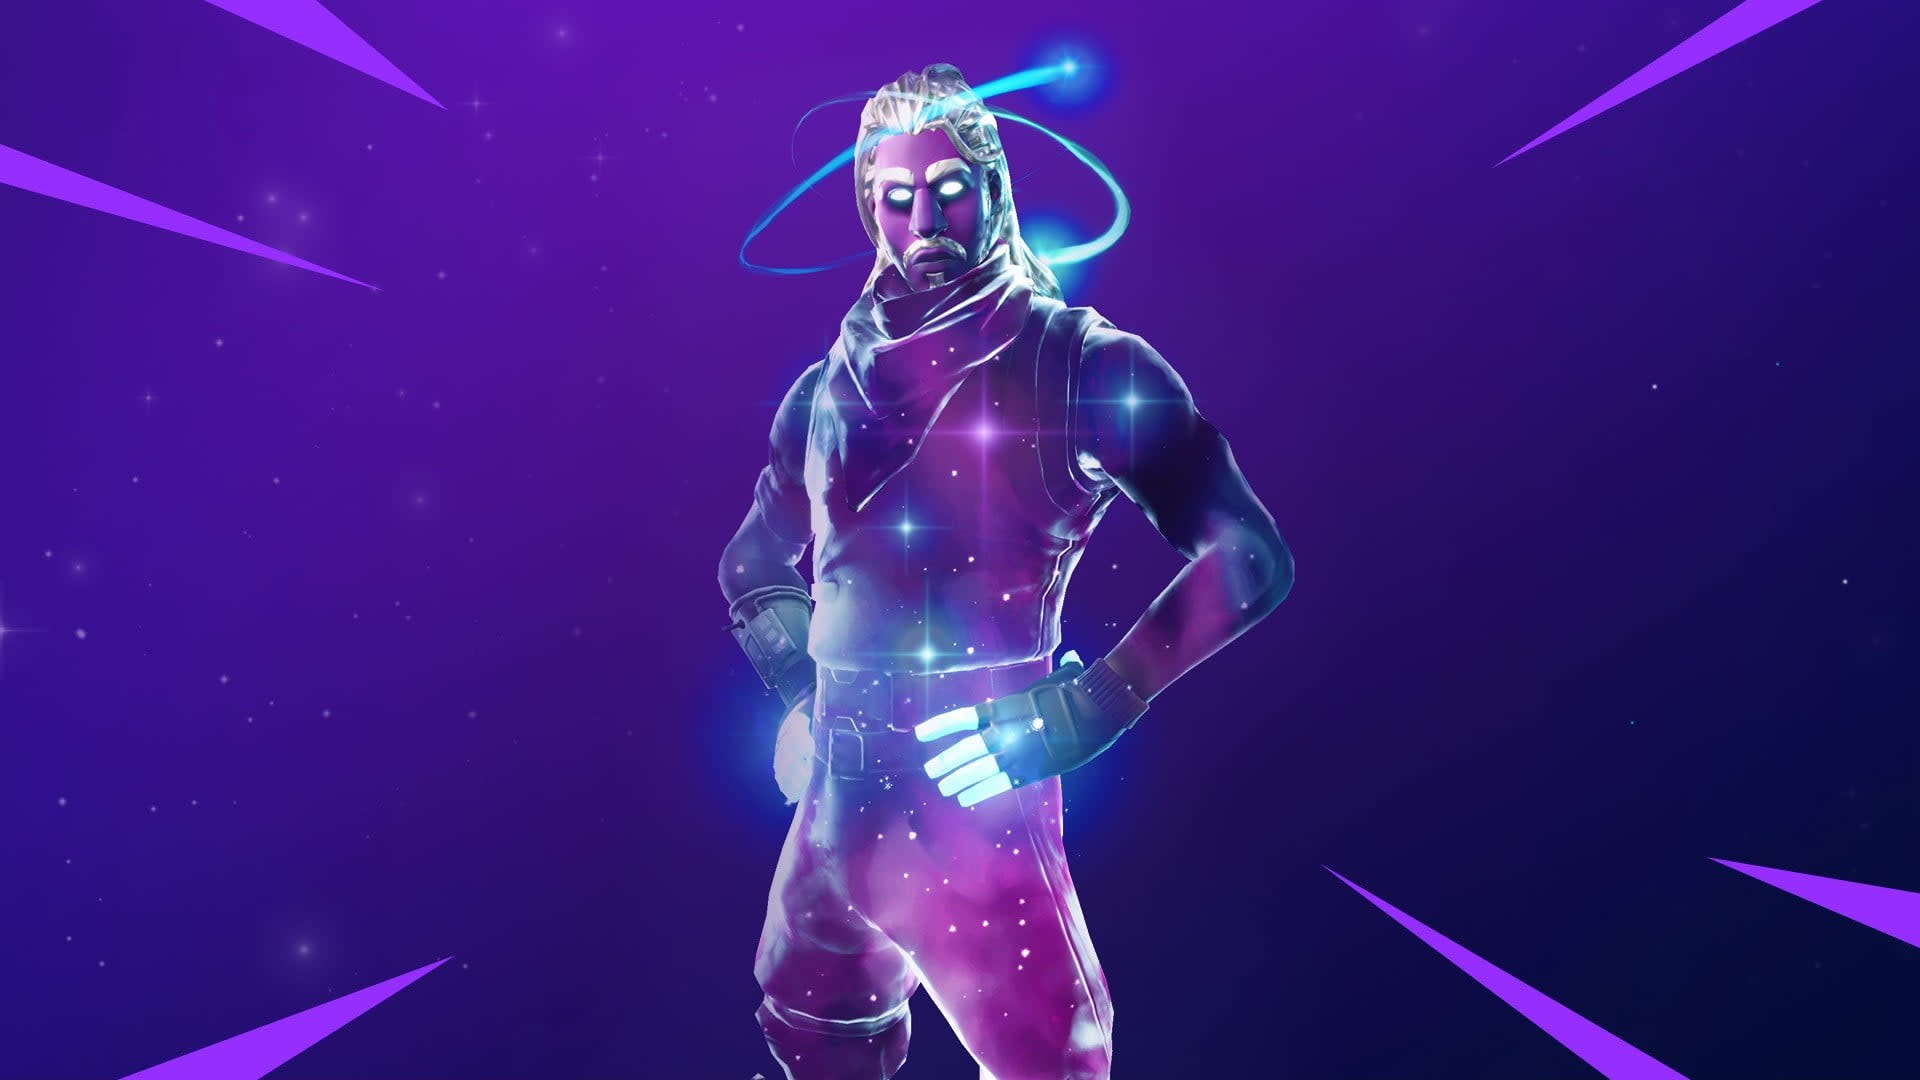 How To Unlock The Galaxy Skin In Fortnite - 